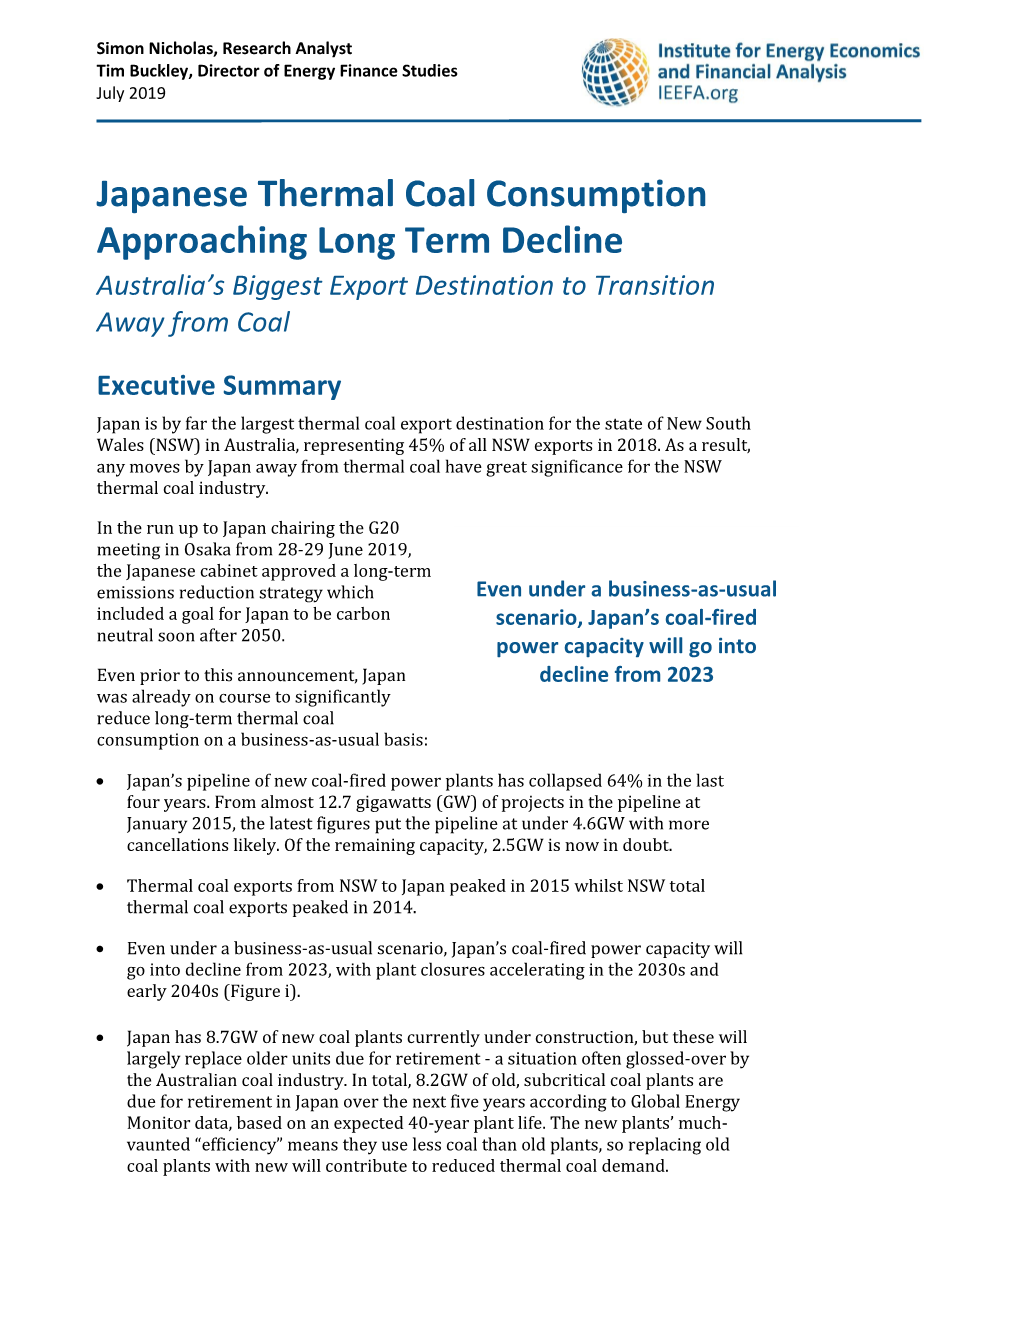 Japanese Thermal Coal Consumption Approaching Long Term Decline Australia’S Biggest Export Destination to Transition Away from Coal